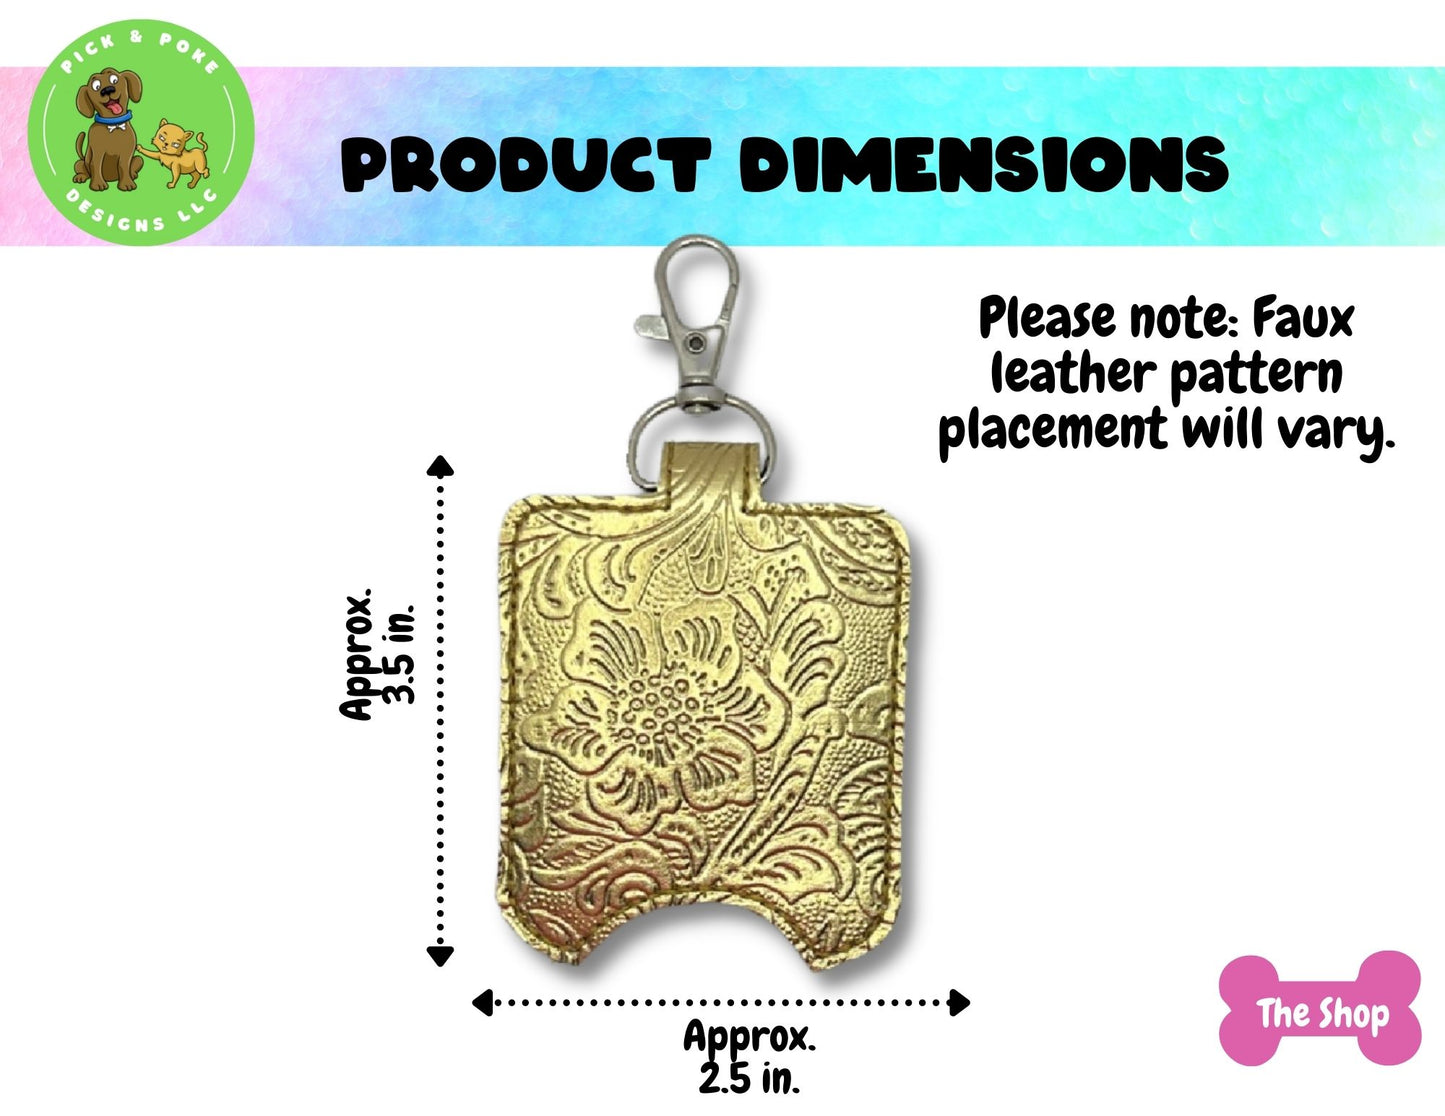 Metallic Faux Tooled Leather Hand Sanitizer Holder Key Chain | Embroidered on Vinyl | Made to Order